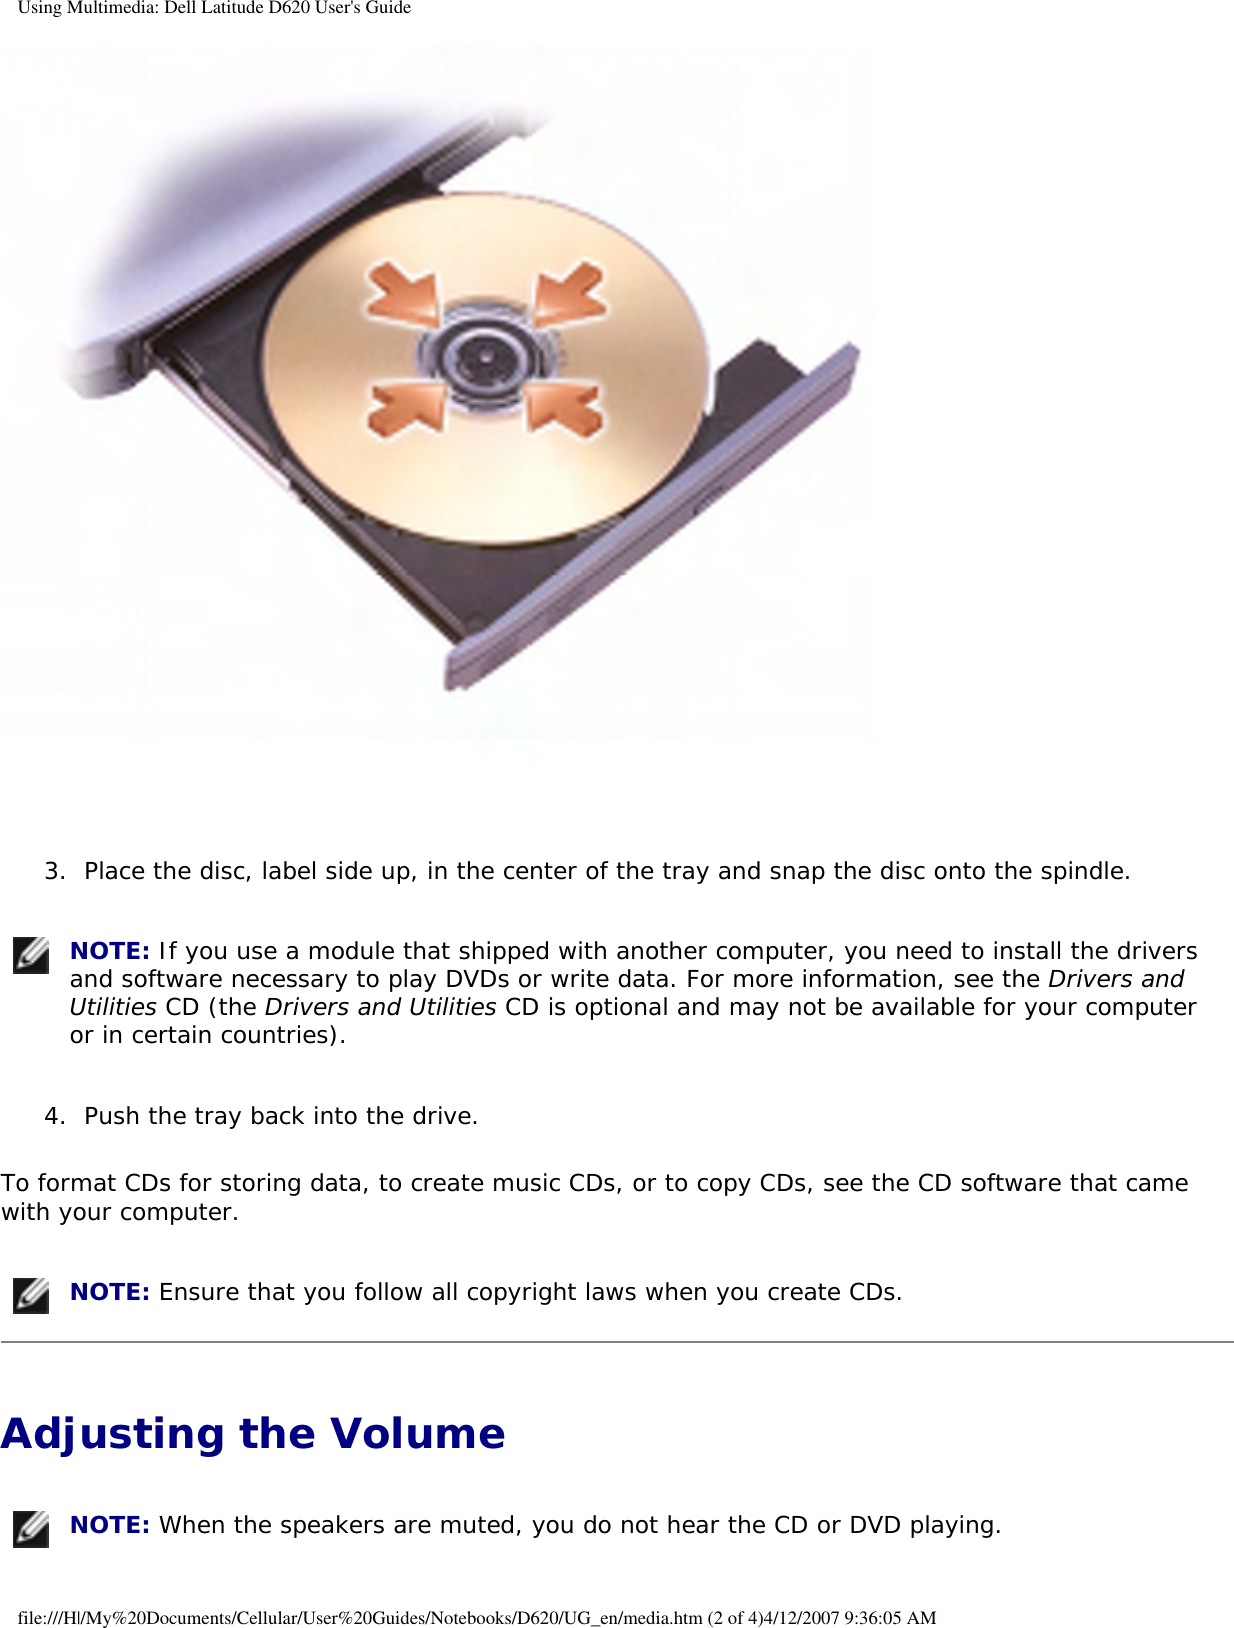 Using Multimedia: Dell Latitude D620 User&apos;s Guide 3.  Place the disc, label side up, in the center of the tray and snap the disc onto the spindle.    NOTE: If you use a module that shipped with another computer, you need to install the drivers and software necessary to play DVDs or write data. For more information, see the Drivers and Utilities CD (the Drivers and Utilities CD is optional and may not be available for your computer or in certain countries). 4.  Push the tray back into the drive.   To format CDs for storing data, to create music CDs, or to copy CDs, see the CD software that came with your computer. NOTE: Ensure that you follow all copyright laws when you create CDs.Adjusting the Volume  NOTE: When the speakers are muted, you do not hear the CD or DVD playing.file:///H|/My%20Documents/Cellular/User%20Guides/Notebooks/D620/UG_en/media.htm (2 of 4)4/12/2007 9:36:05 AM